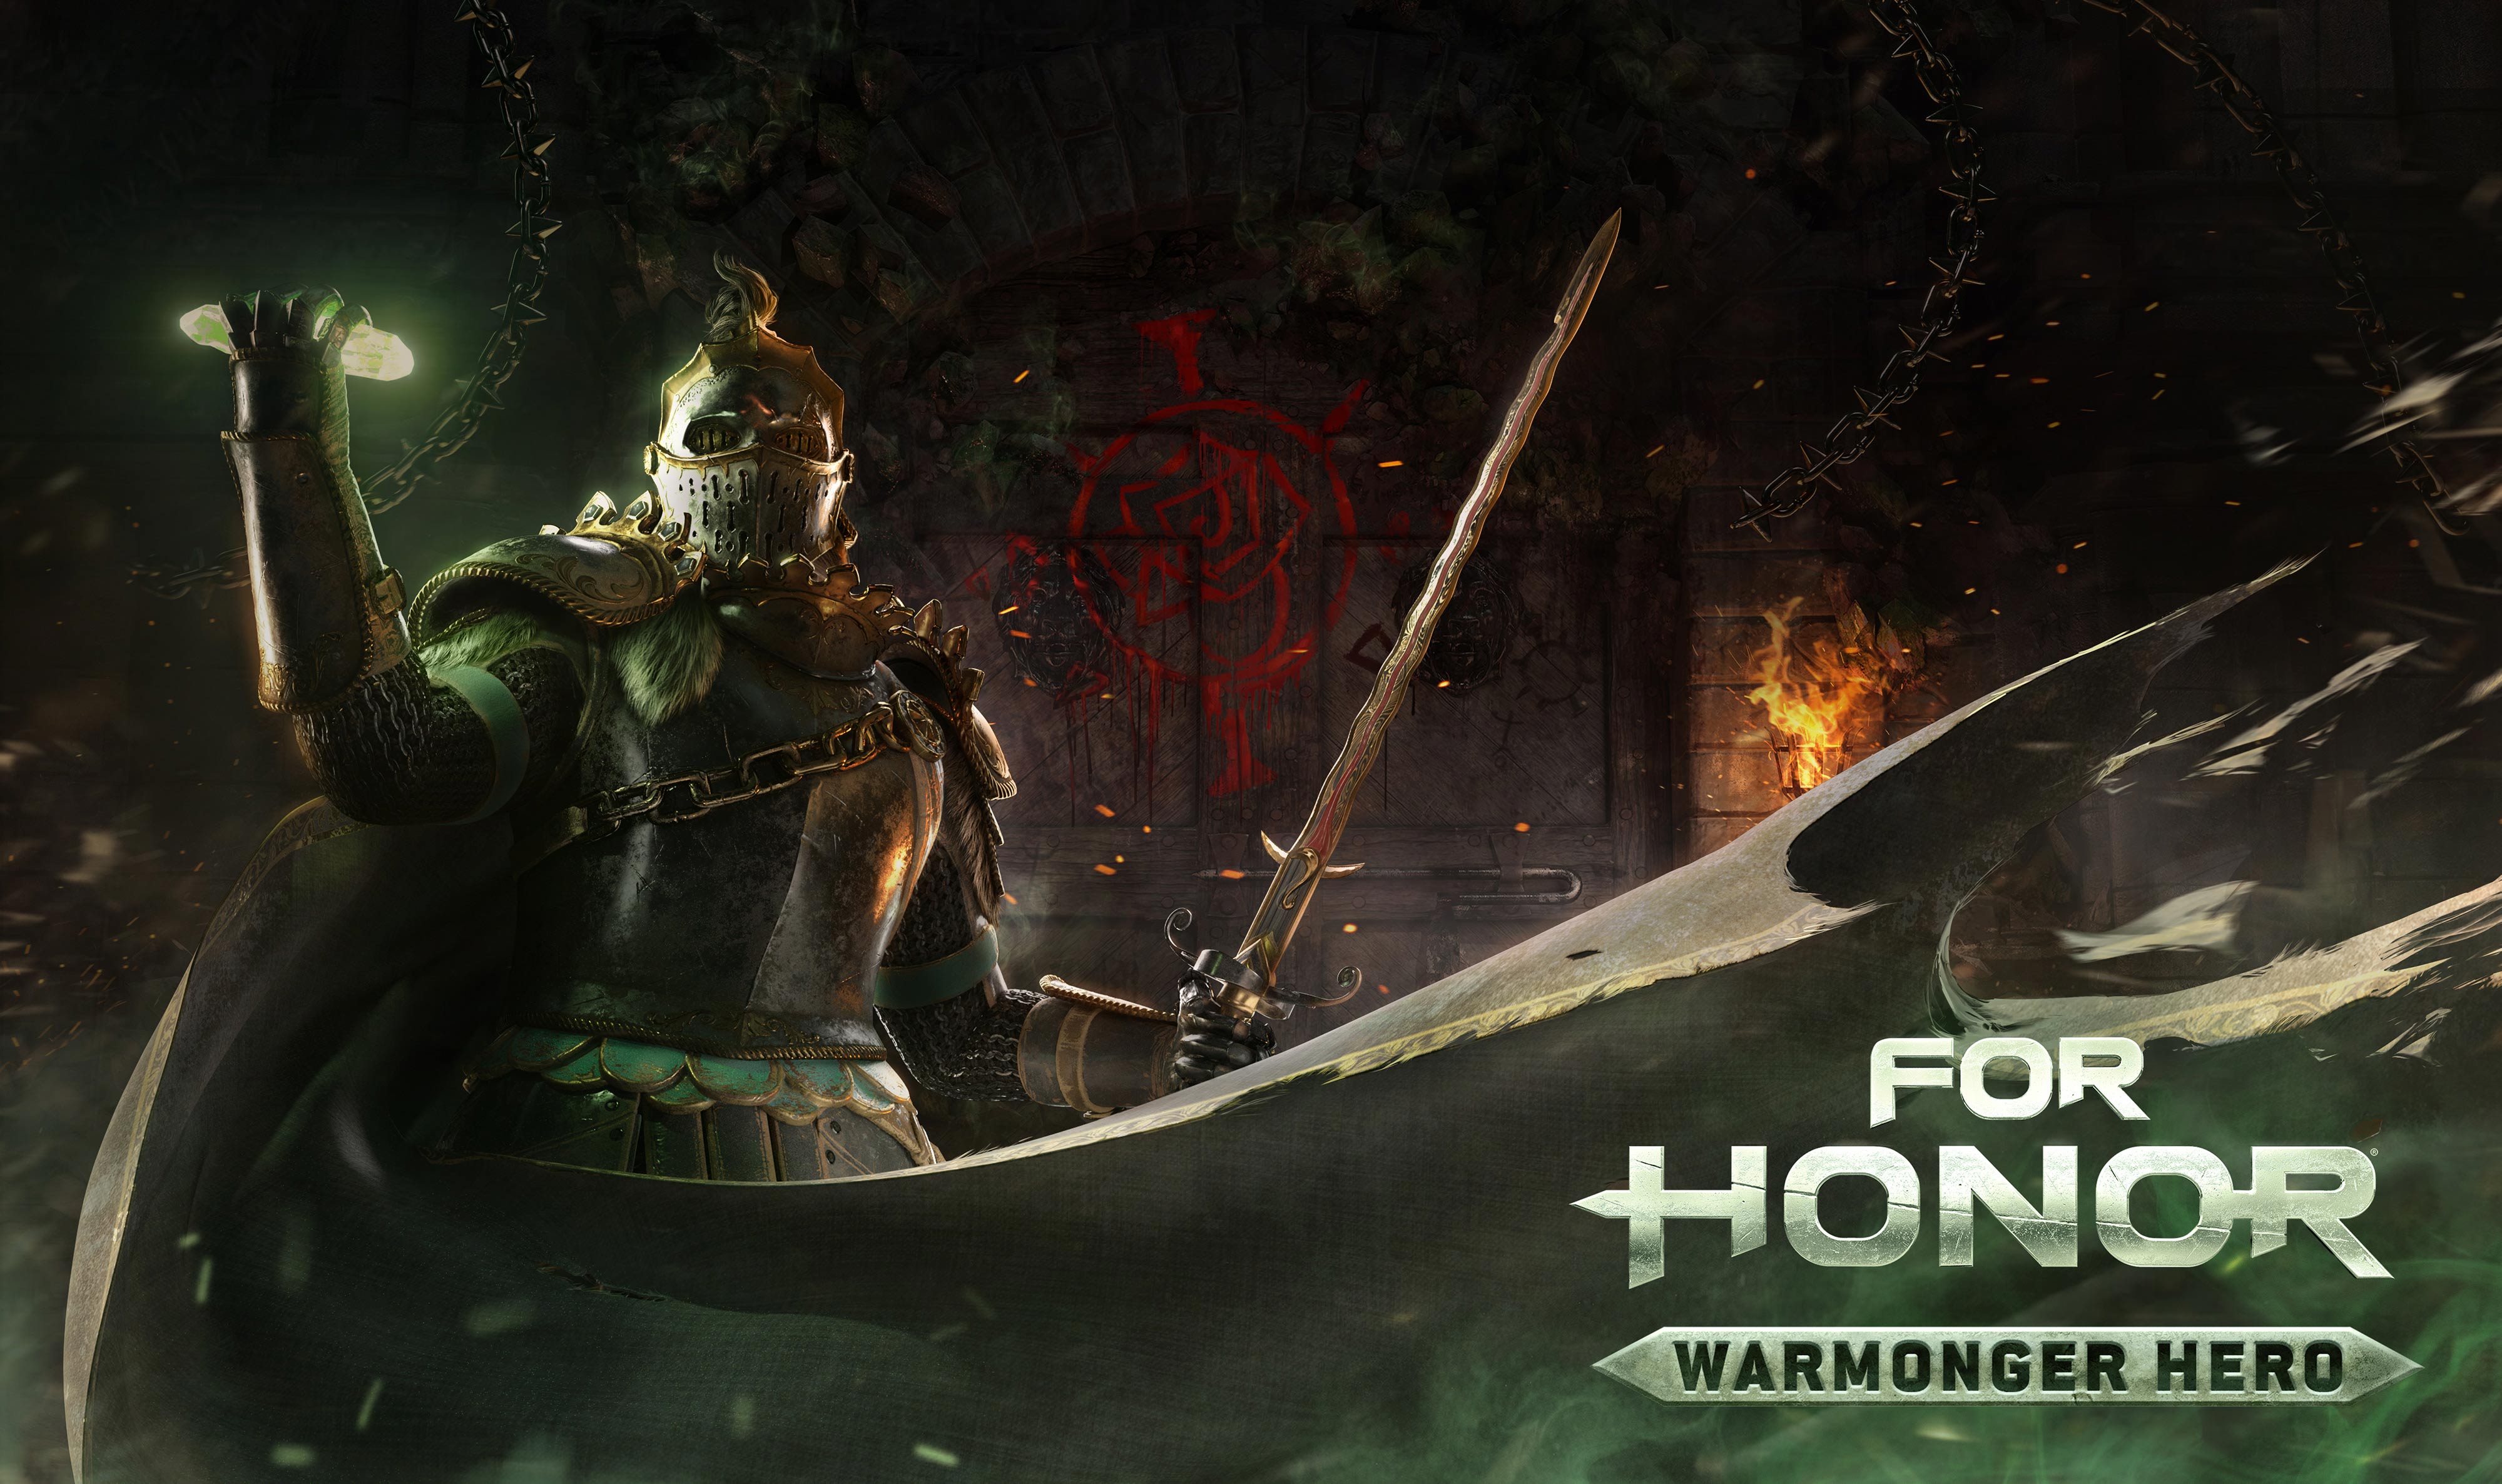 For Honor Free Weekend 2